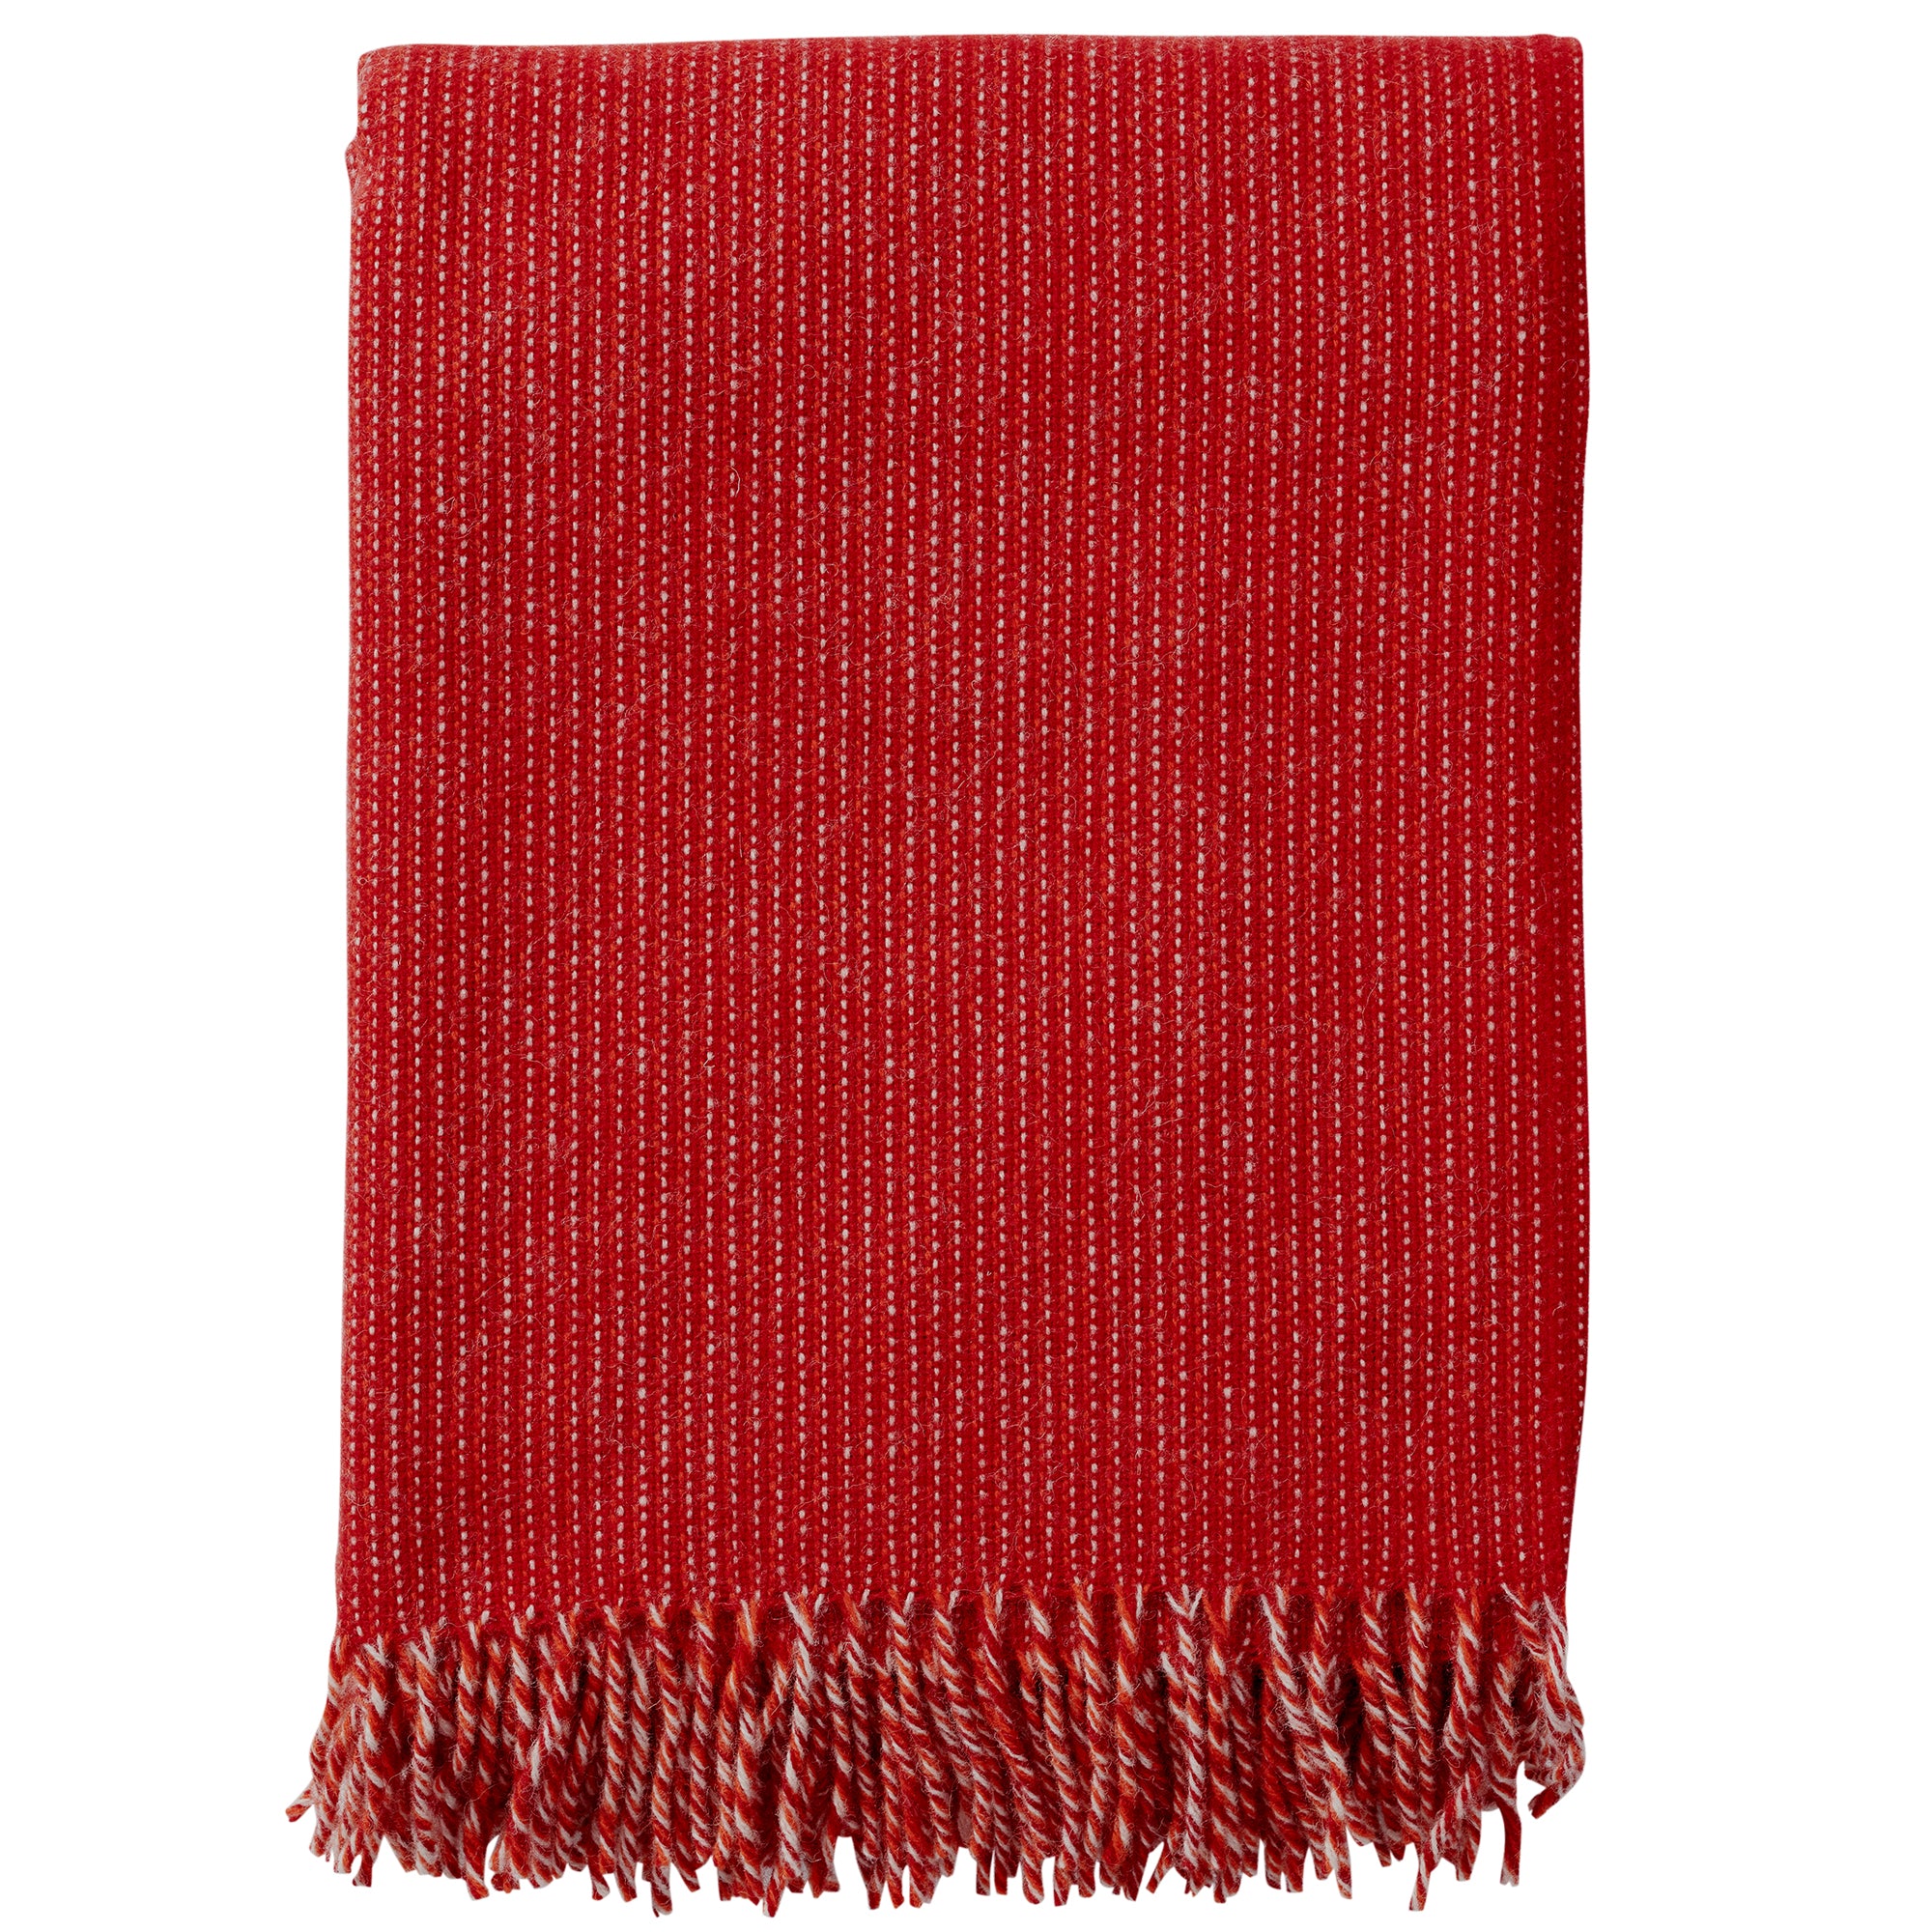 Shimmer Red 130x200cm Brushed Lambswool Throw